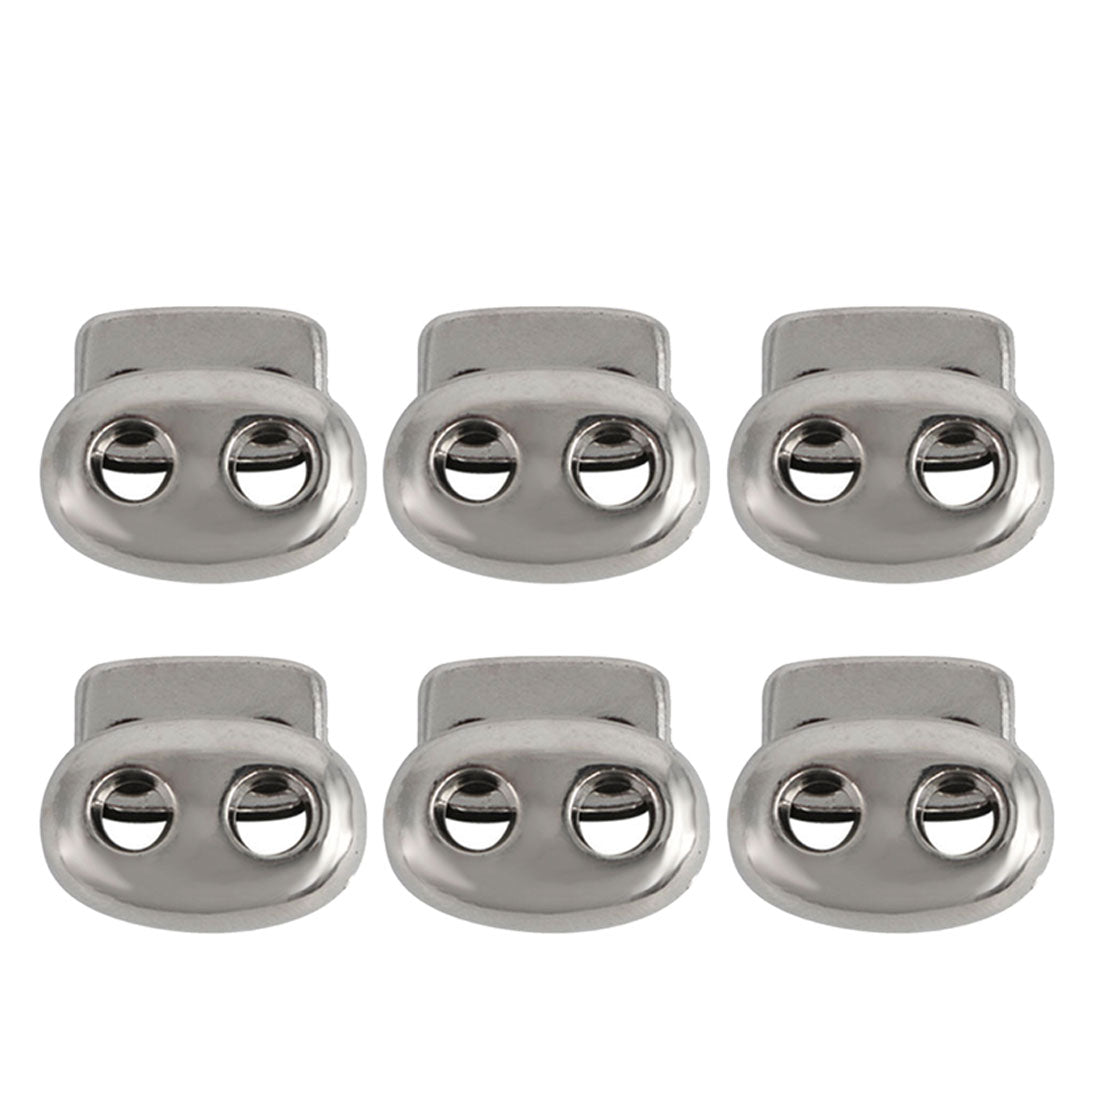 uxcell Uxcell 6 Pcs Plastic Cord Locks Double Hole End Spring Stopper Fastener, Silver Tone